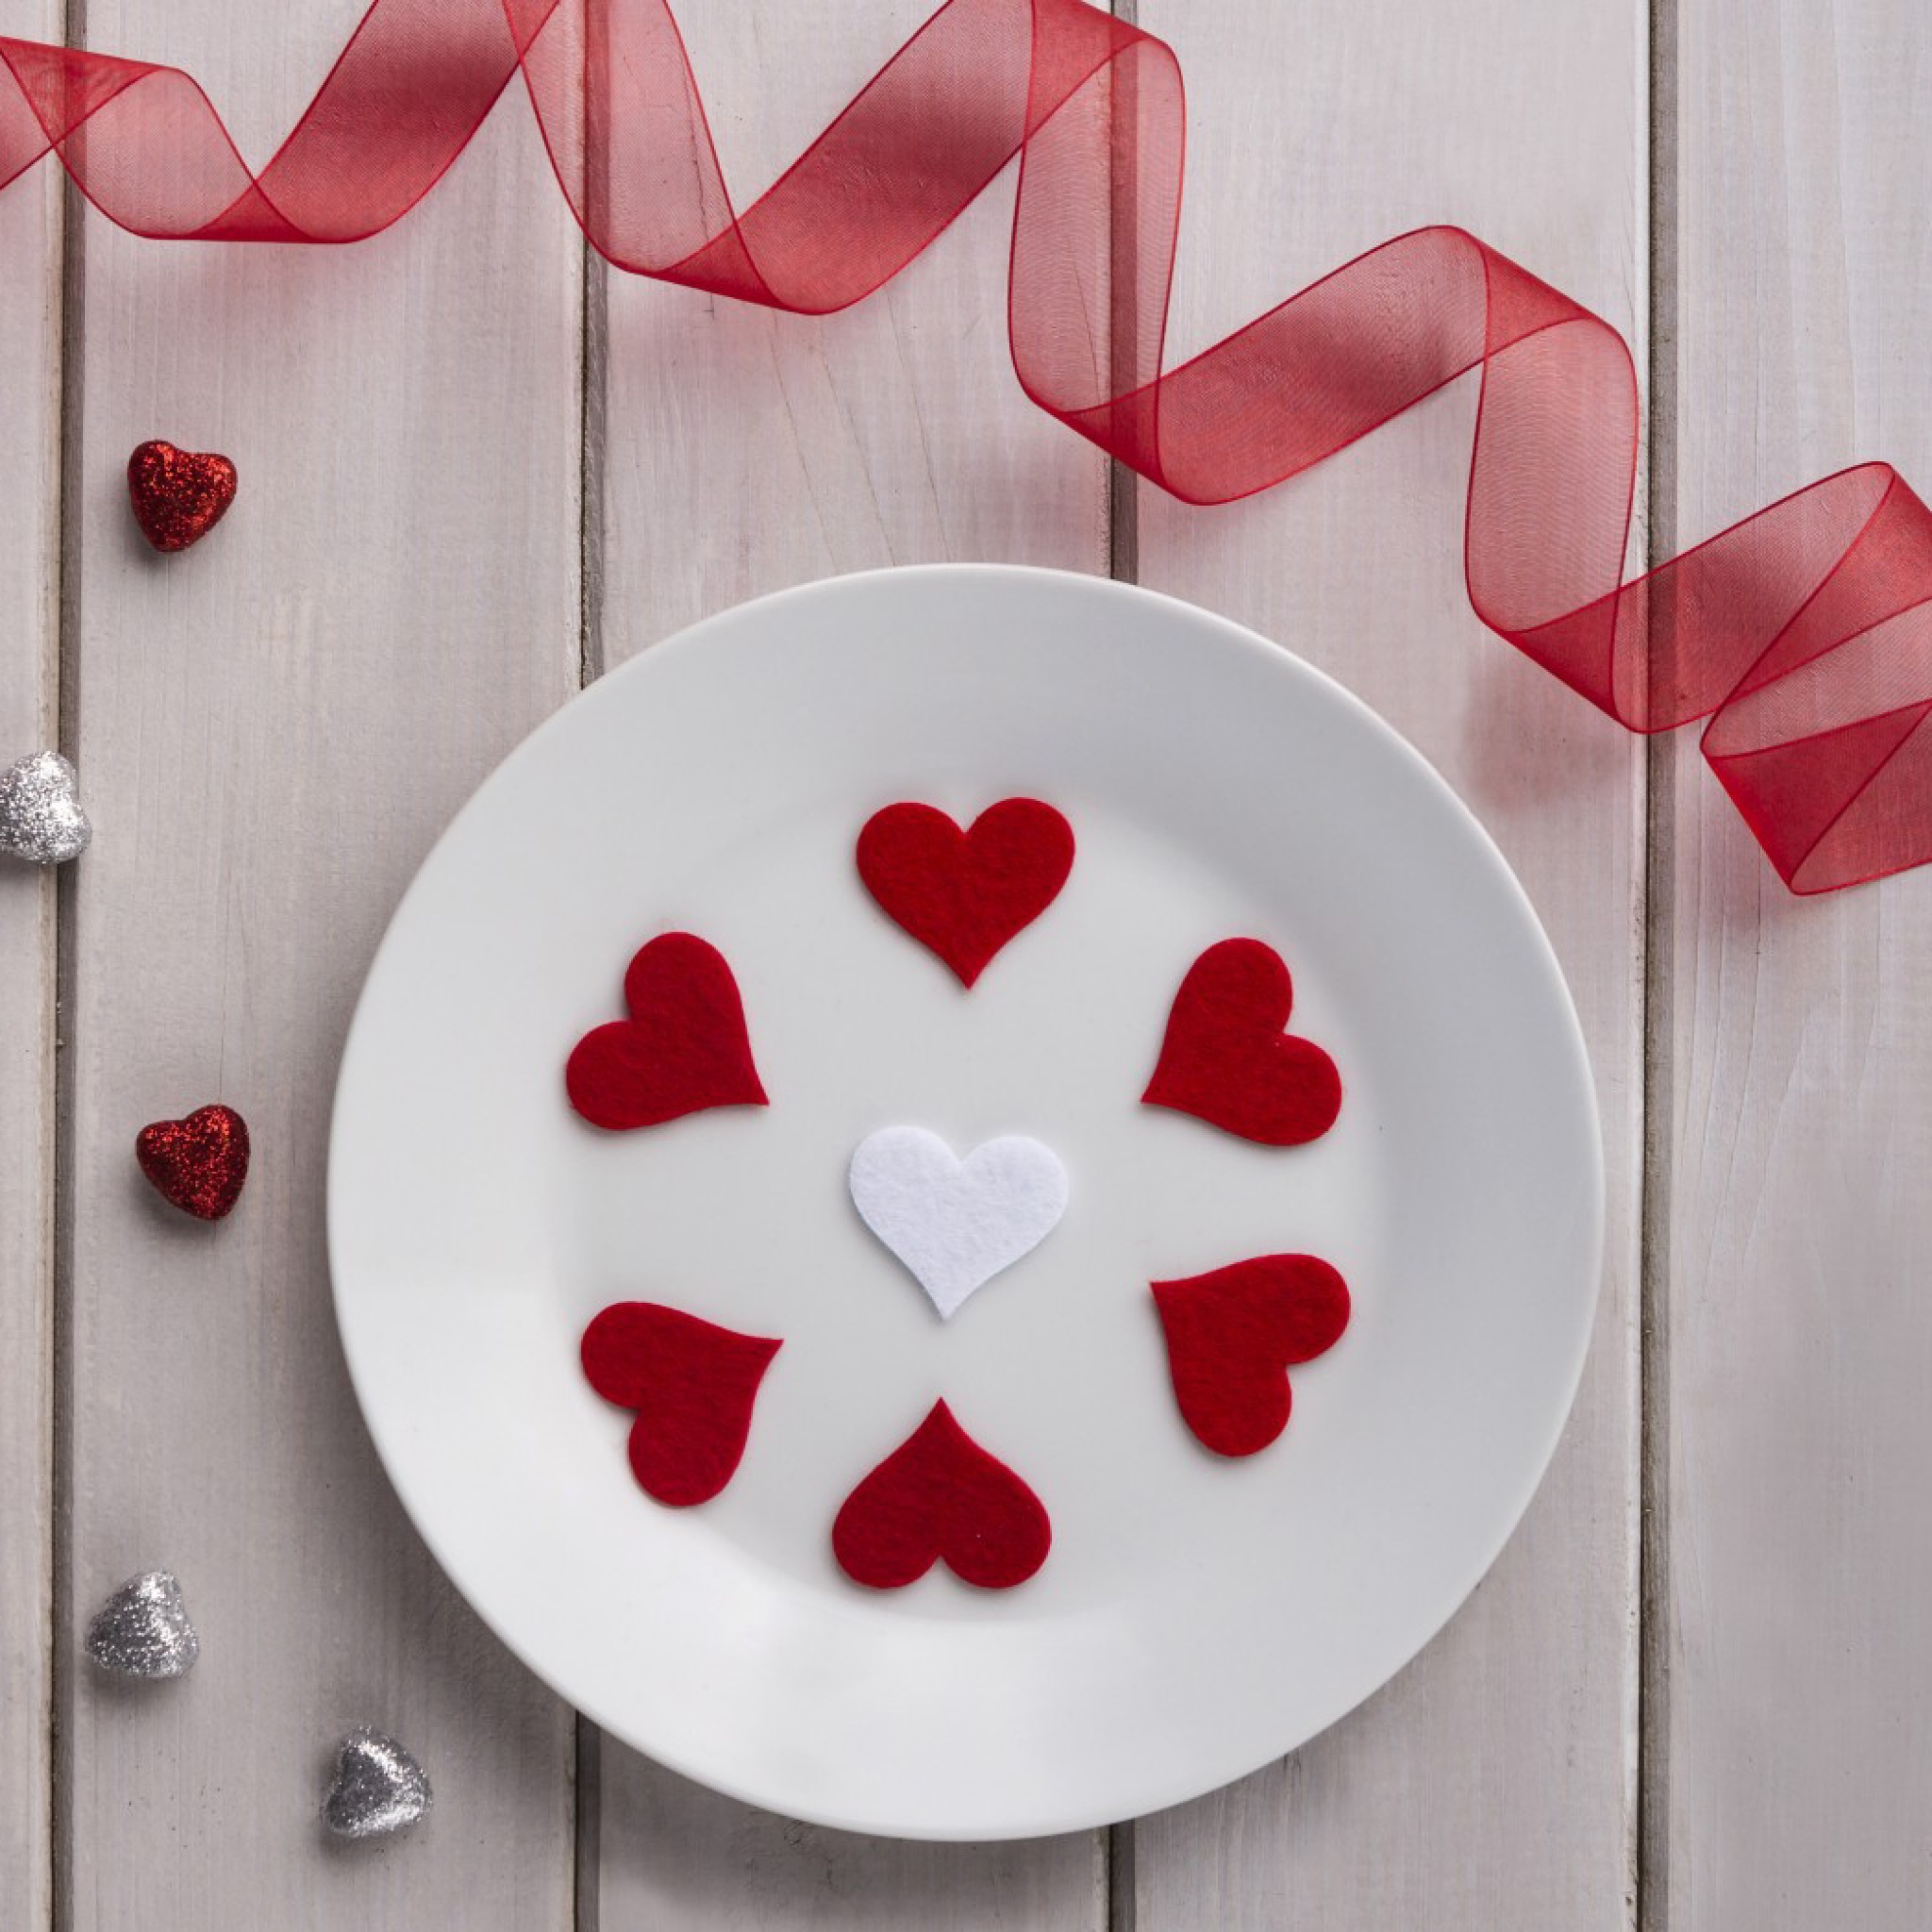 Romantic Valentines Day Table Settings wallpaper 2048x2048